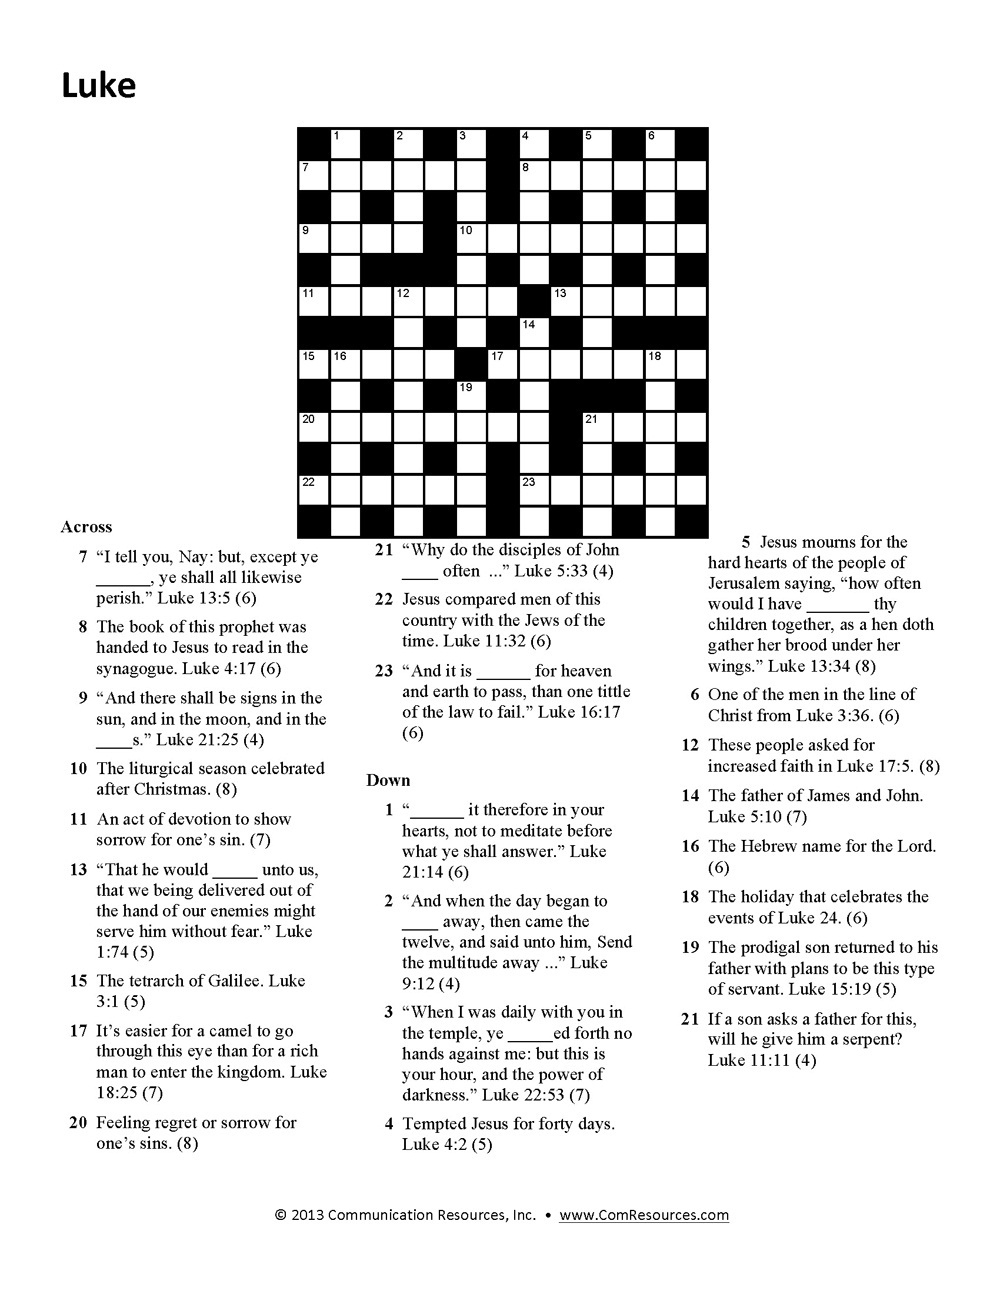 15 Fun Bible Crossword Puzzles | Kittybabylove - Simple Crossword Puzzles Printable Uk